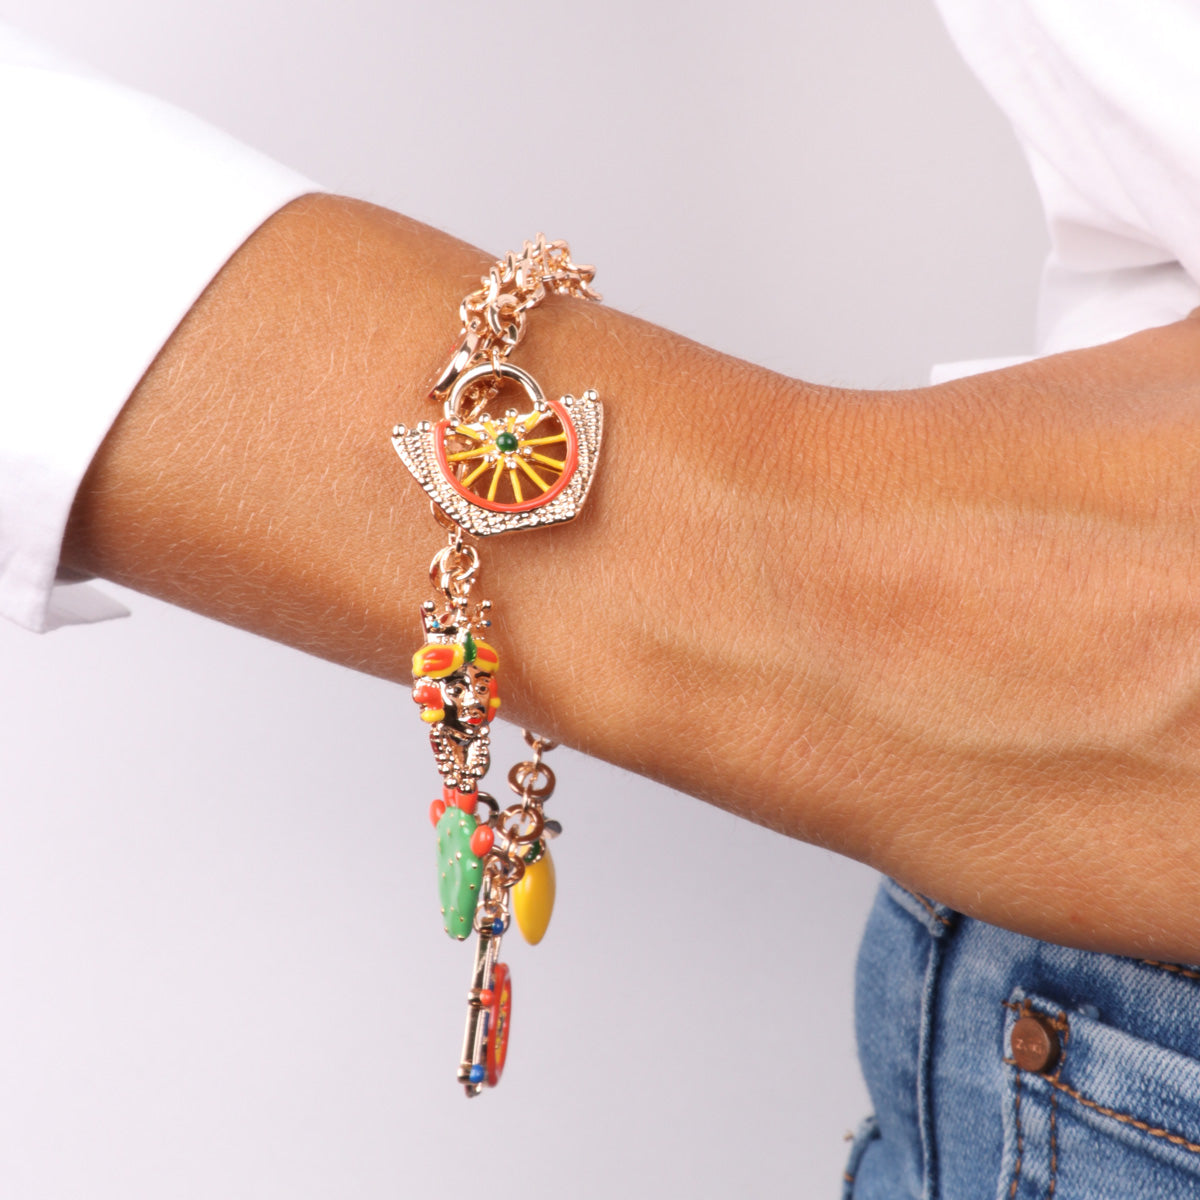 Rose gold metal bracelet with colored charms Sicily, Limone, Coffa, Moro head